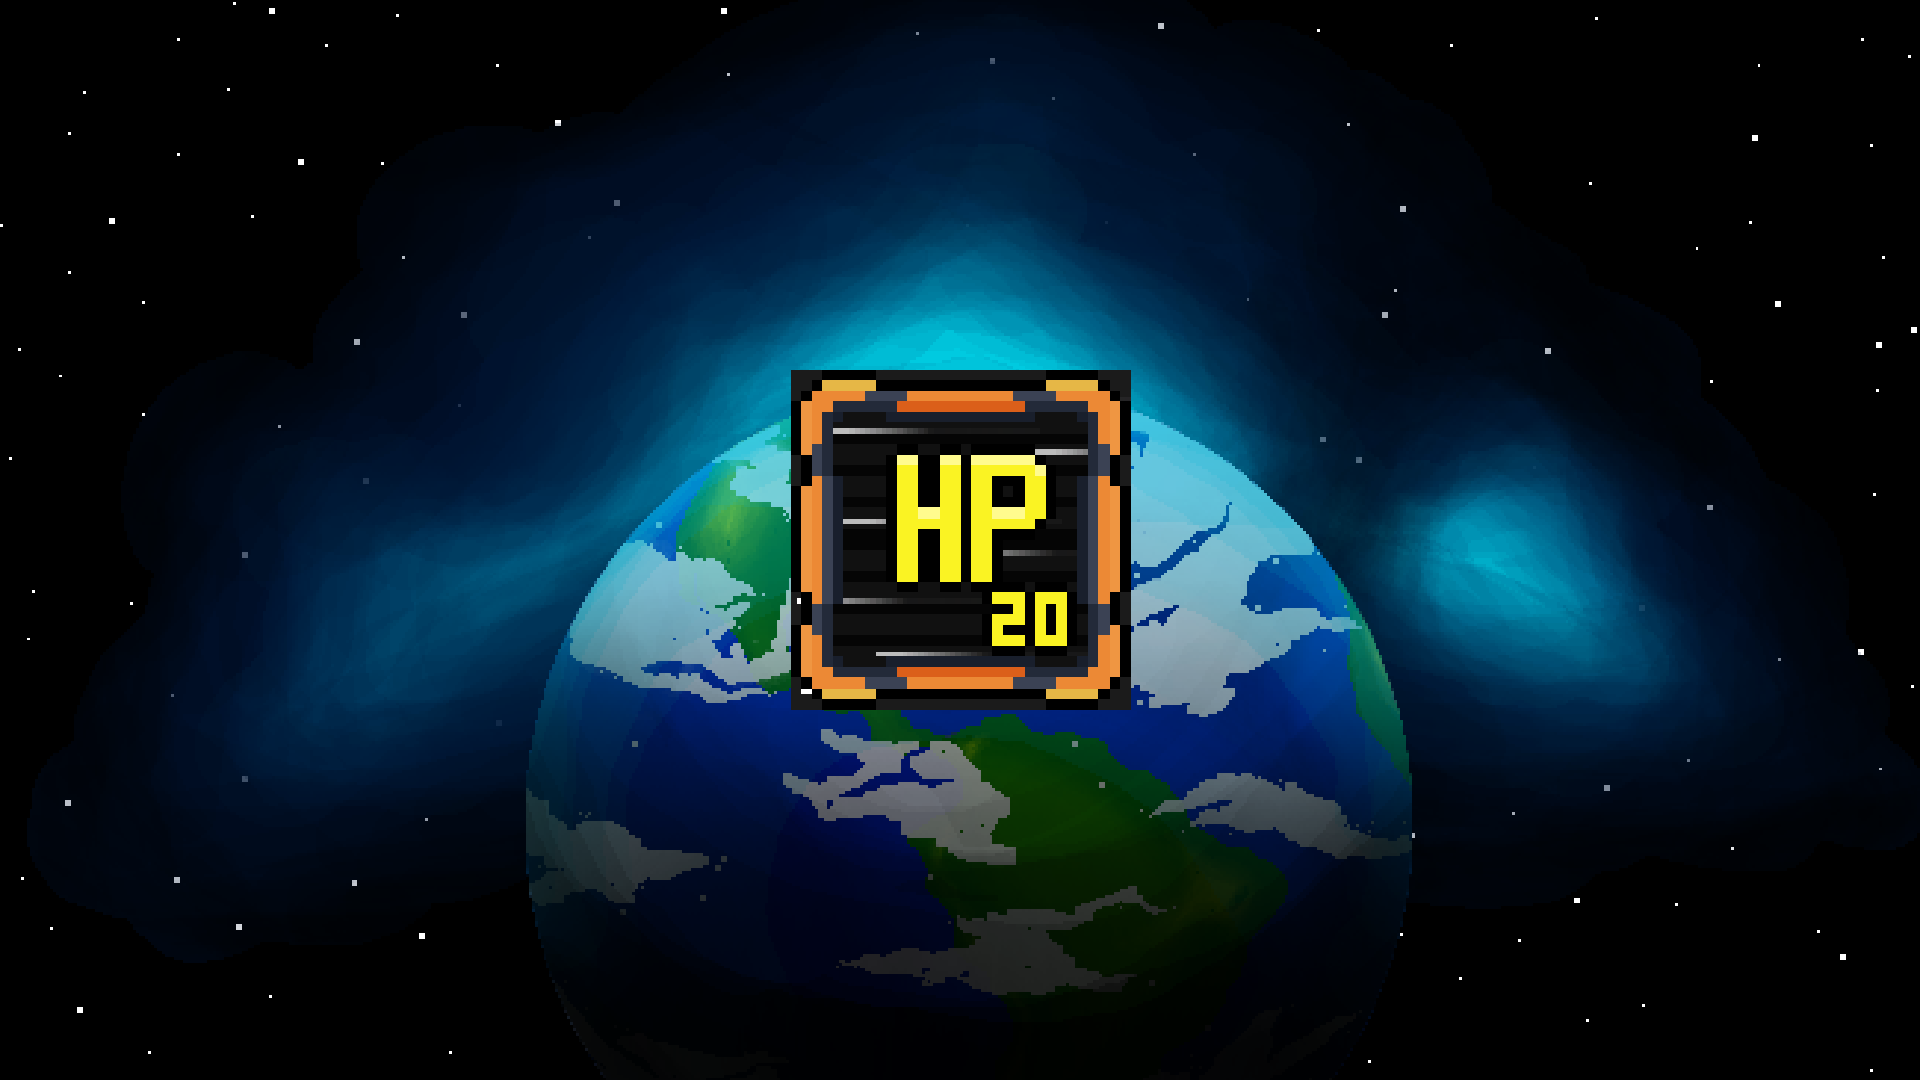 Icon for HP 20